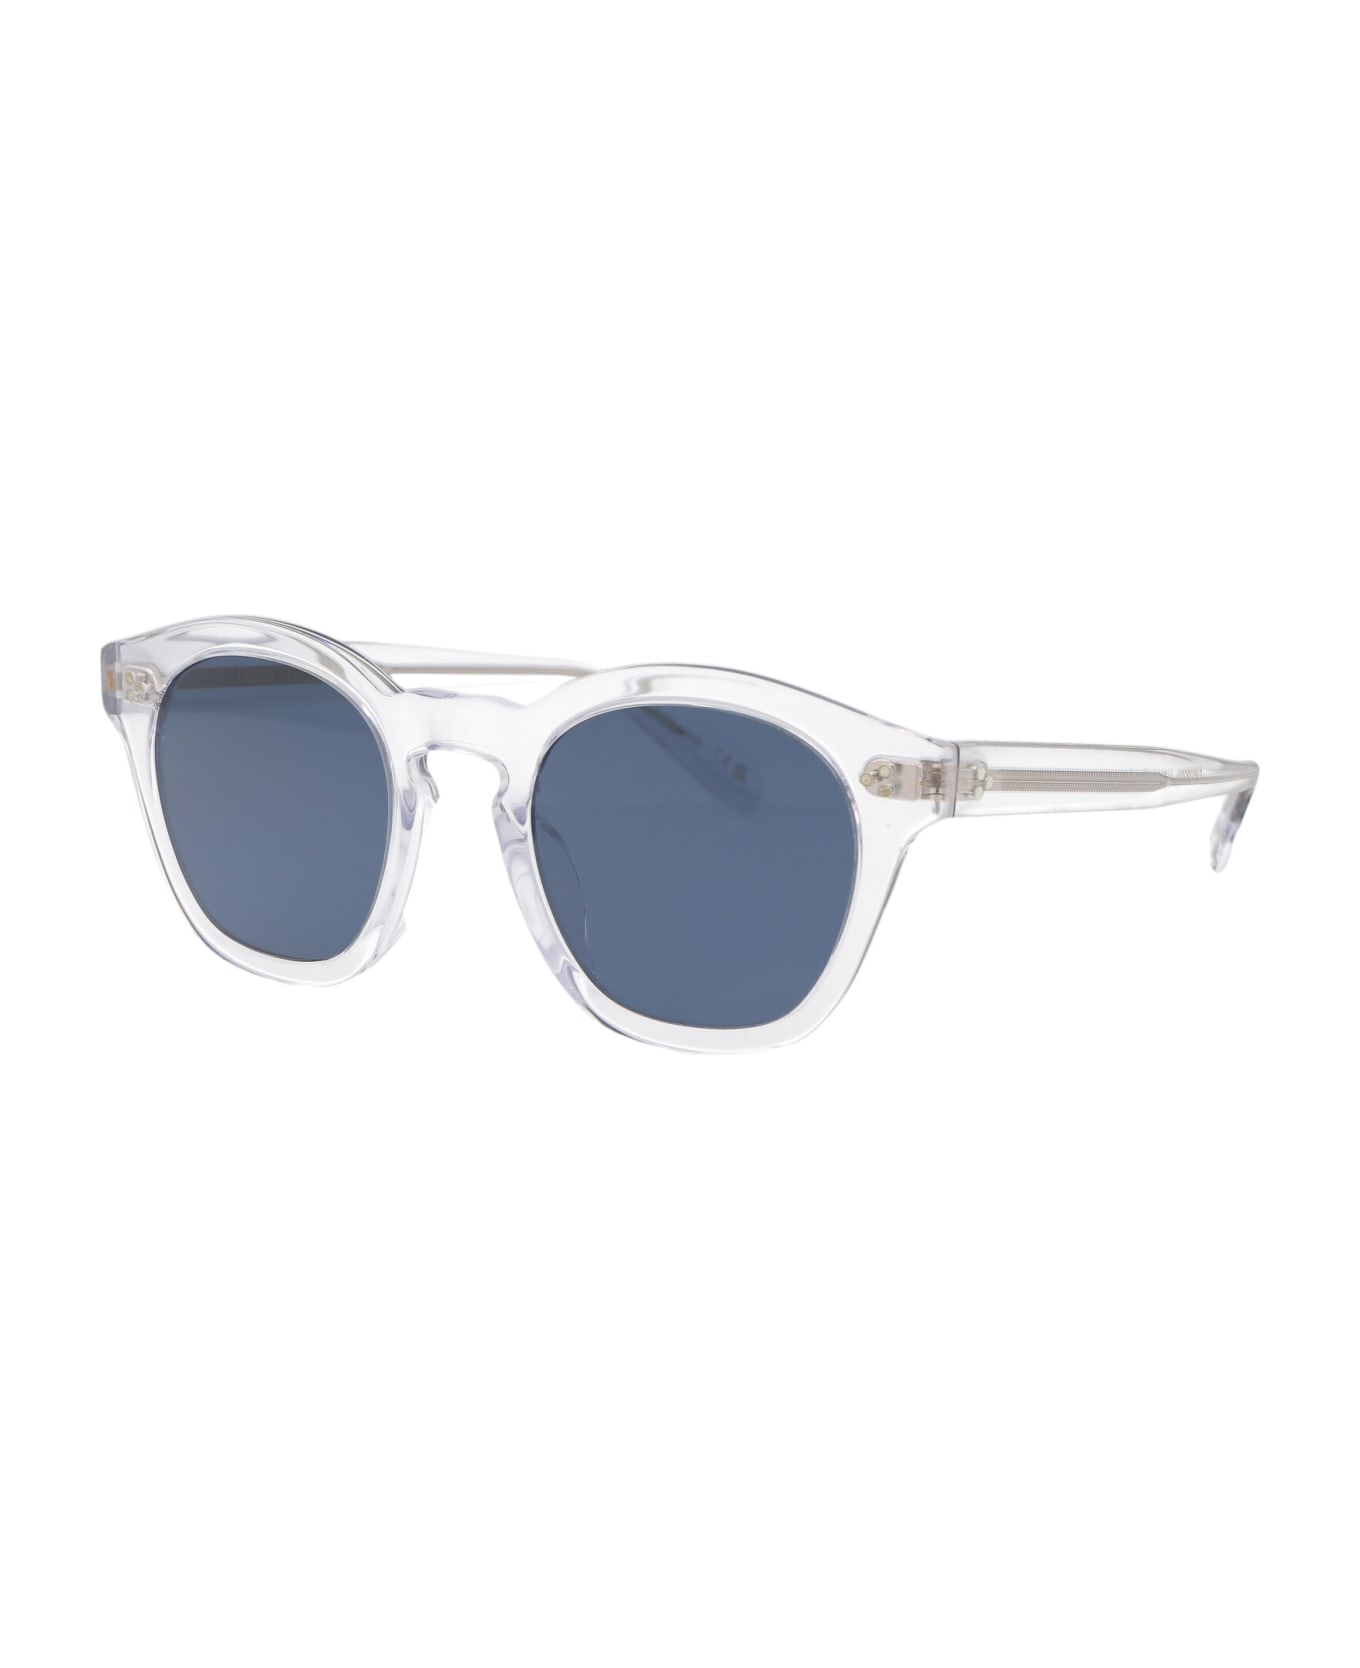 Oliver Peoples Boudreau L.a Sunglasses - 110180 Crystal サングラス